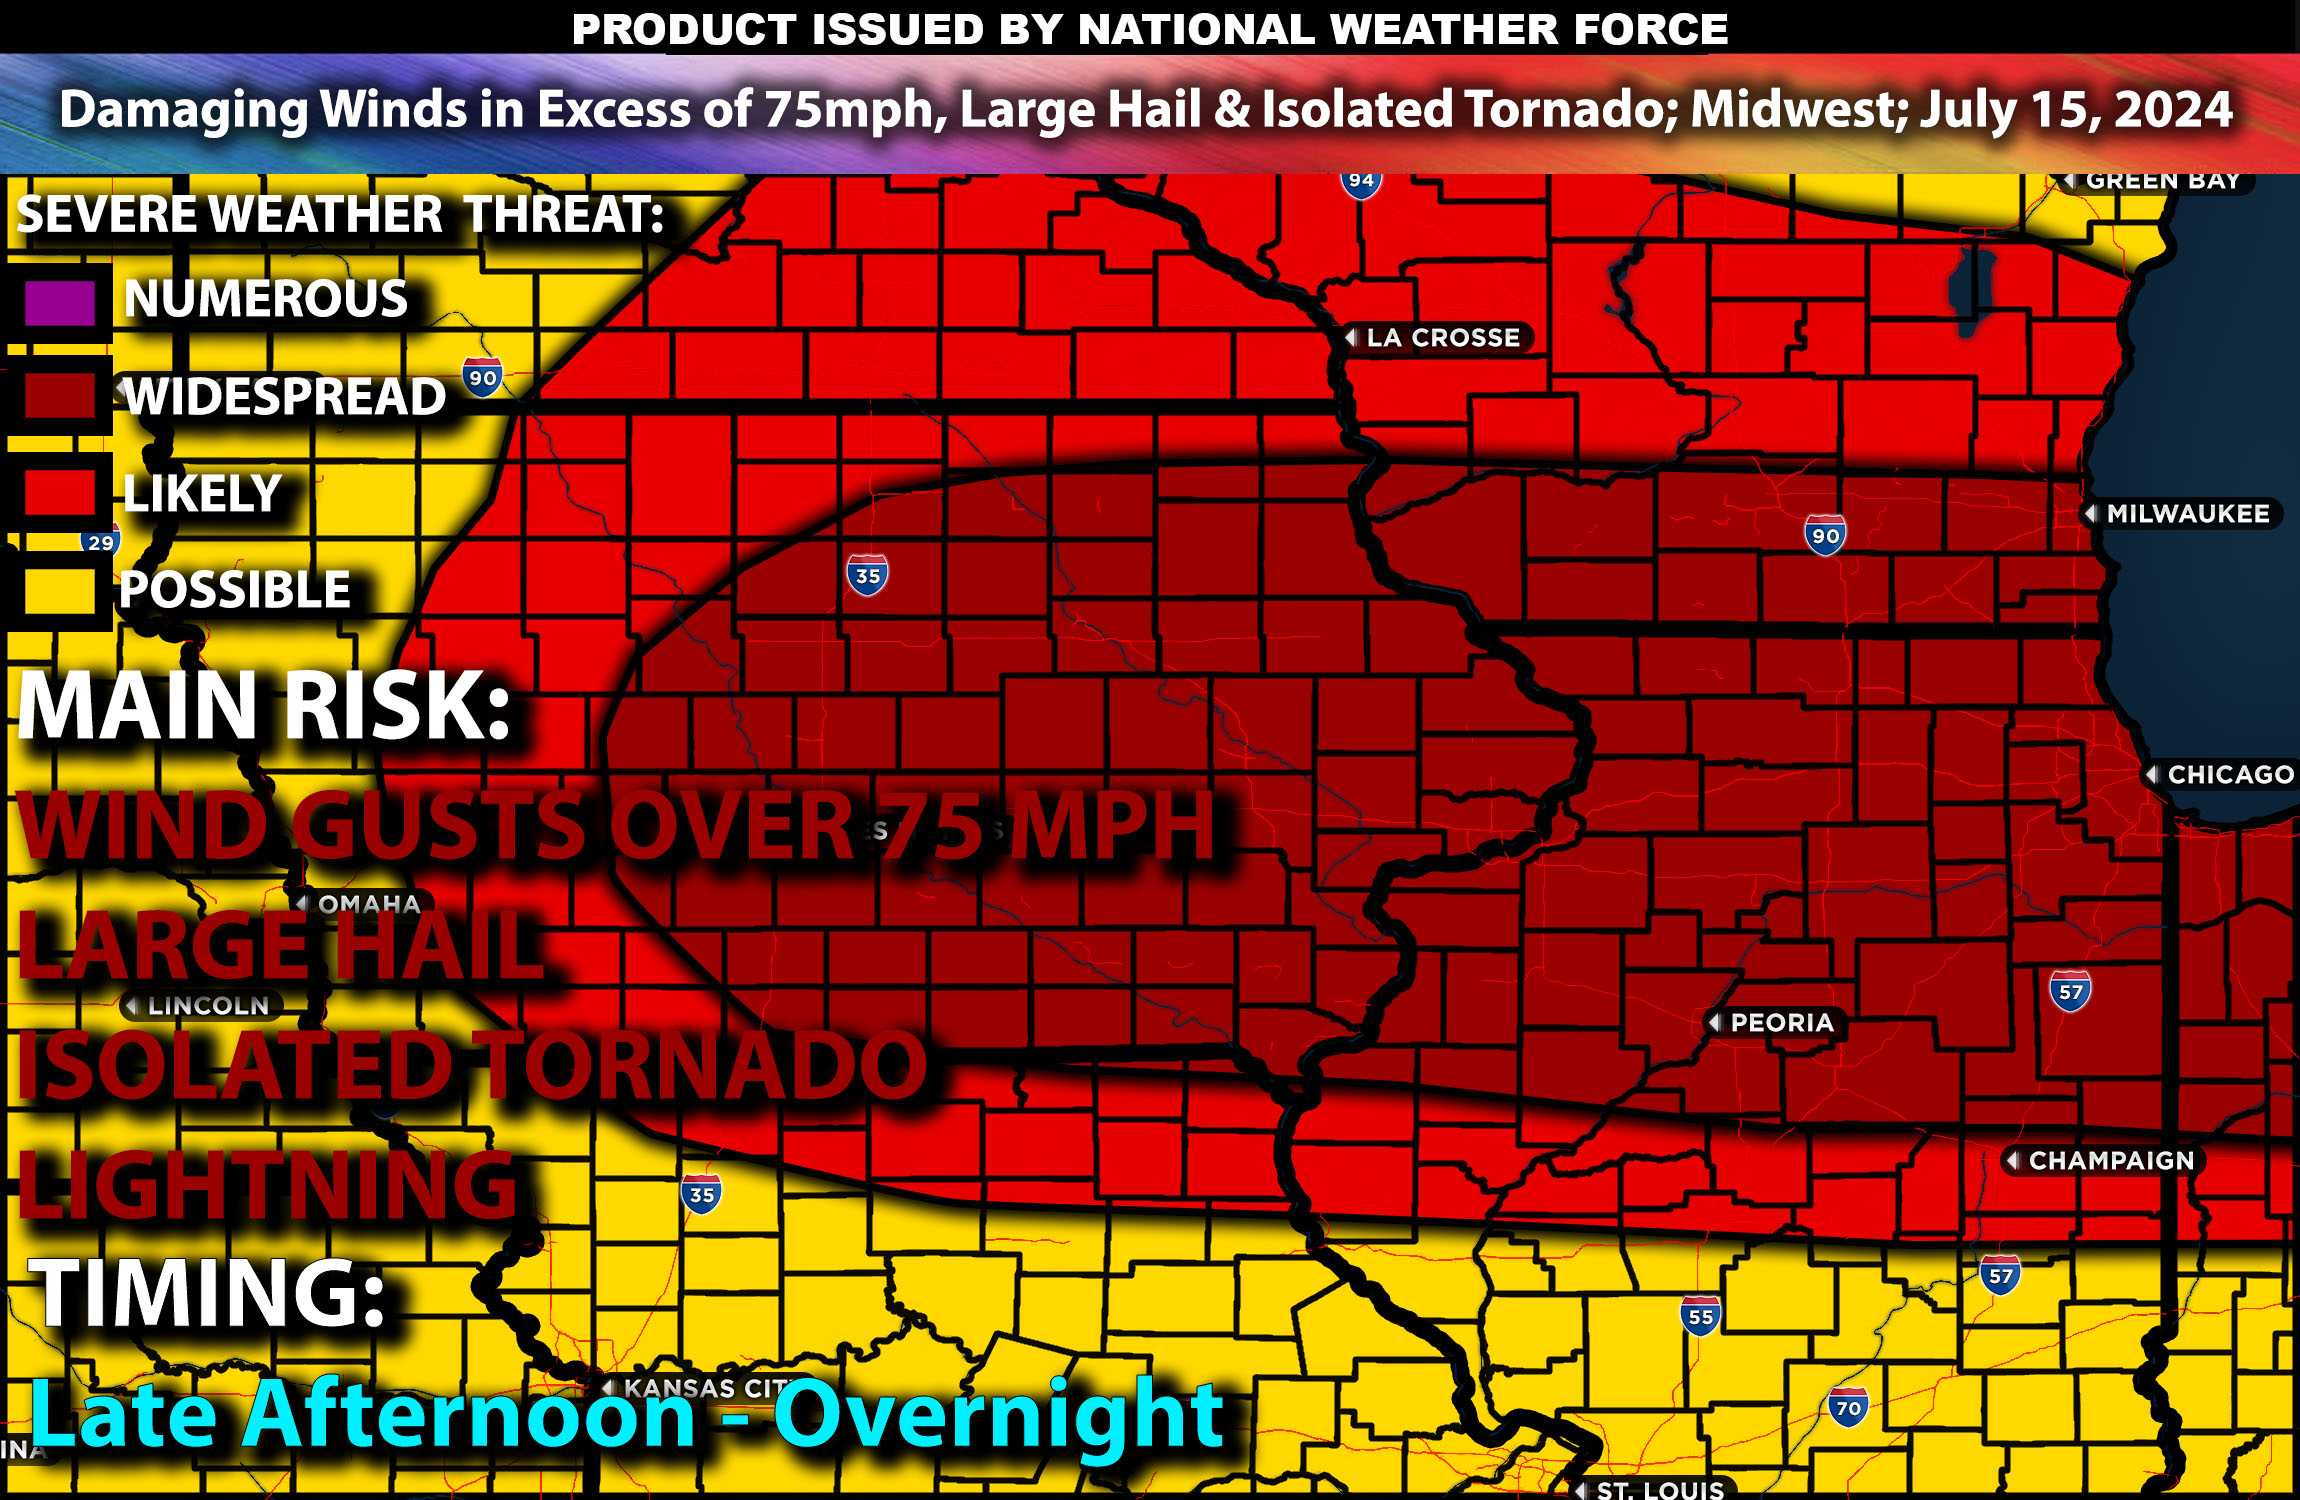 Damaging Winds in Excess of 75mph, Large Hail & Isolated Tornado; Midwest; July 15, 2024